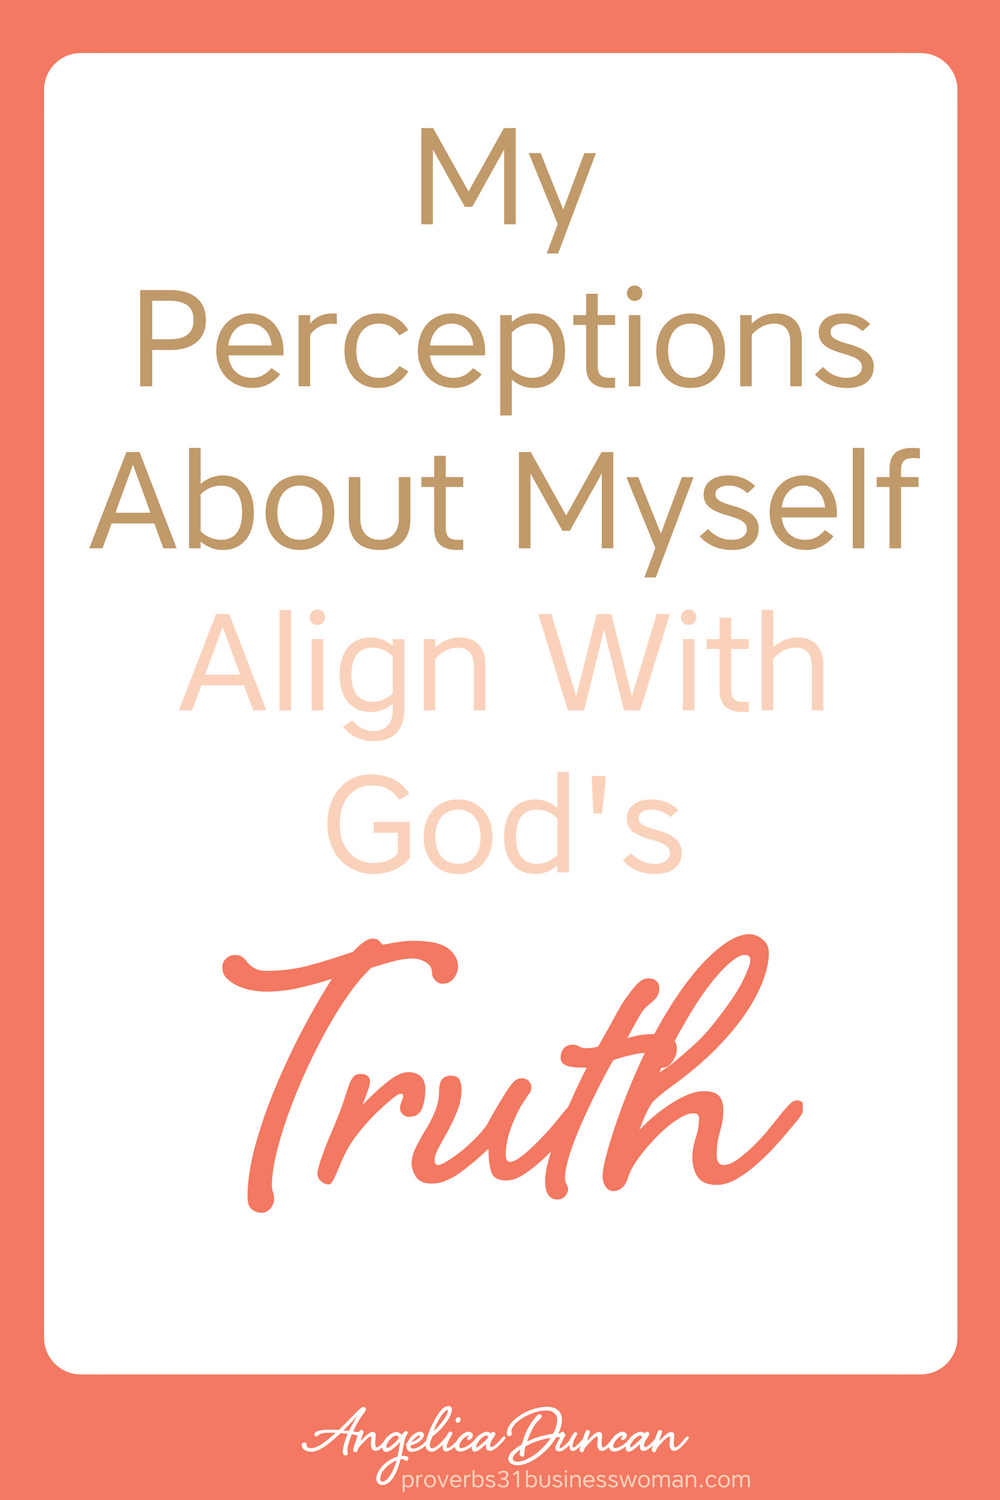 My Perceptions About Myself Align With God's Truth - Biblical Declarations and Affirmations For Christians #christianaffirmations #christianconfessions #christiandeclarations #biblicalaffirmations #biblicalconfessions #biblicaldeclarations #propheticaffirmations #propheticdeclarations #propheticconfessions #christianquotes #inspirationalquotes #motivationalquotes #affirmations #confessions #speaklife #encouragement #inspiration #hope #faith #bible #scripture #angelicaduncan #silkoversteel #sos